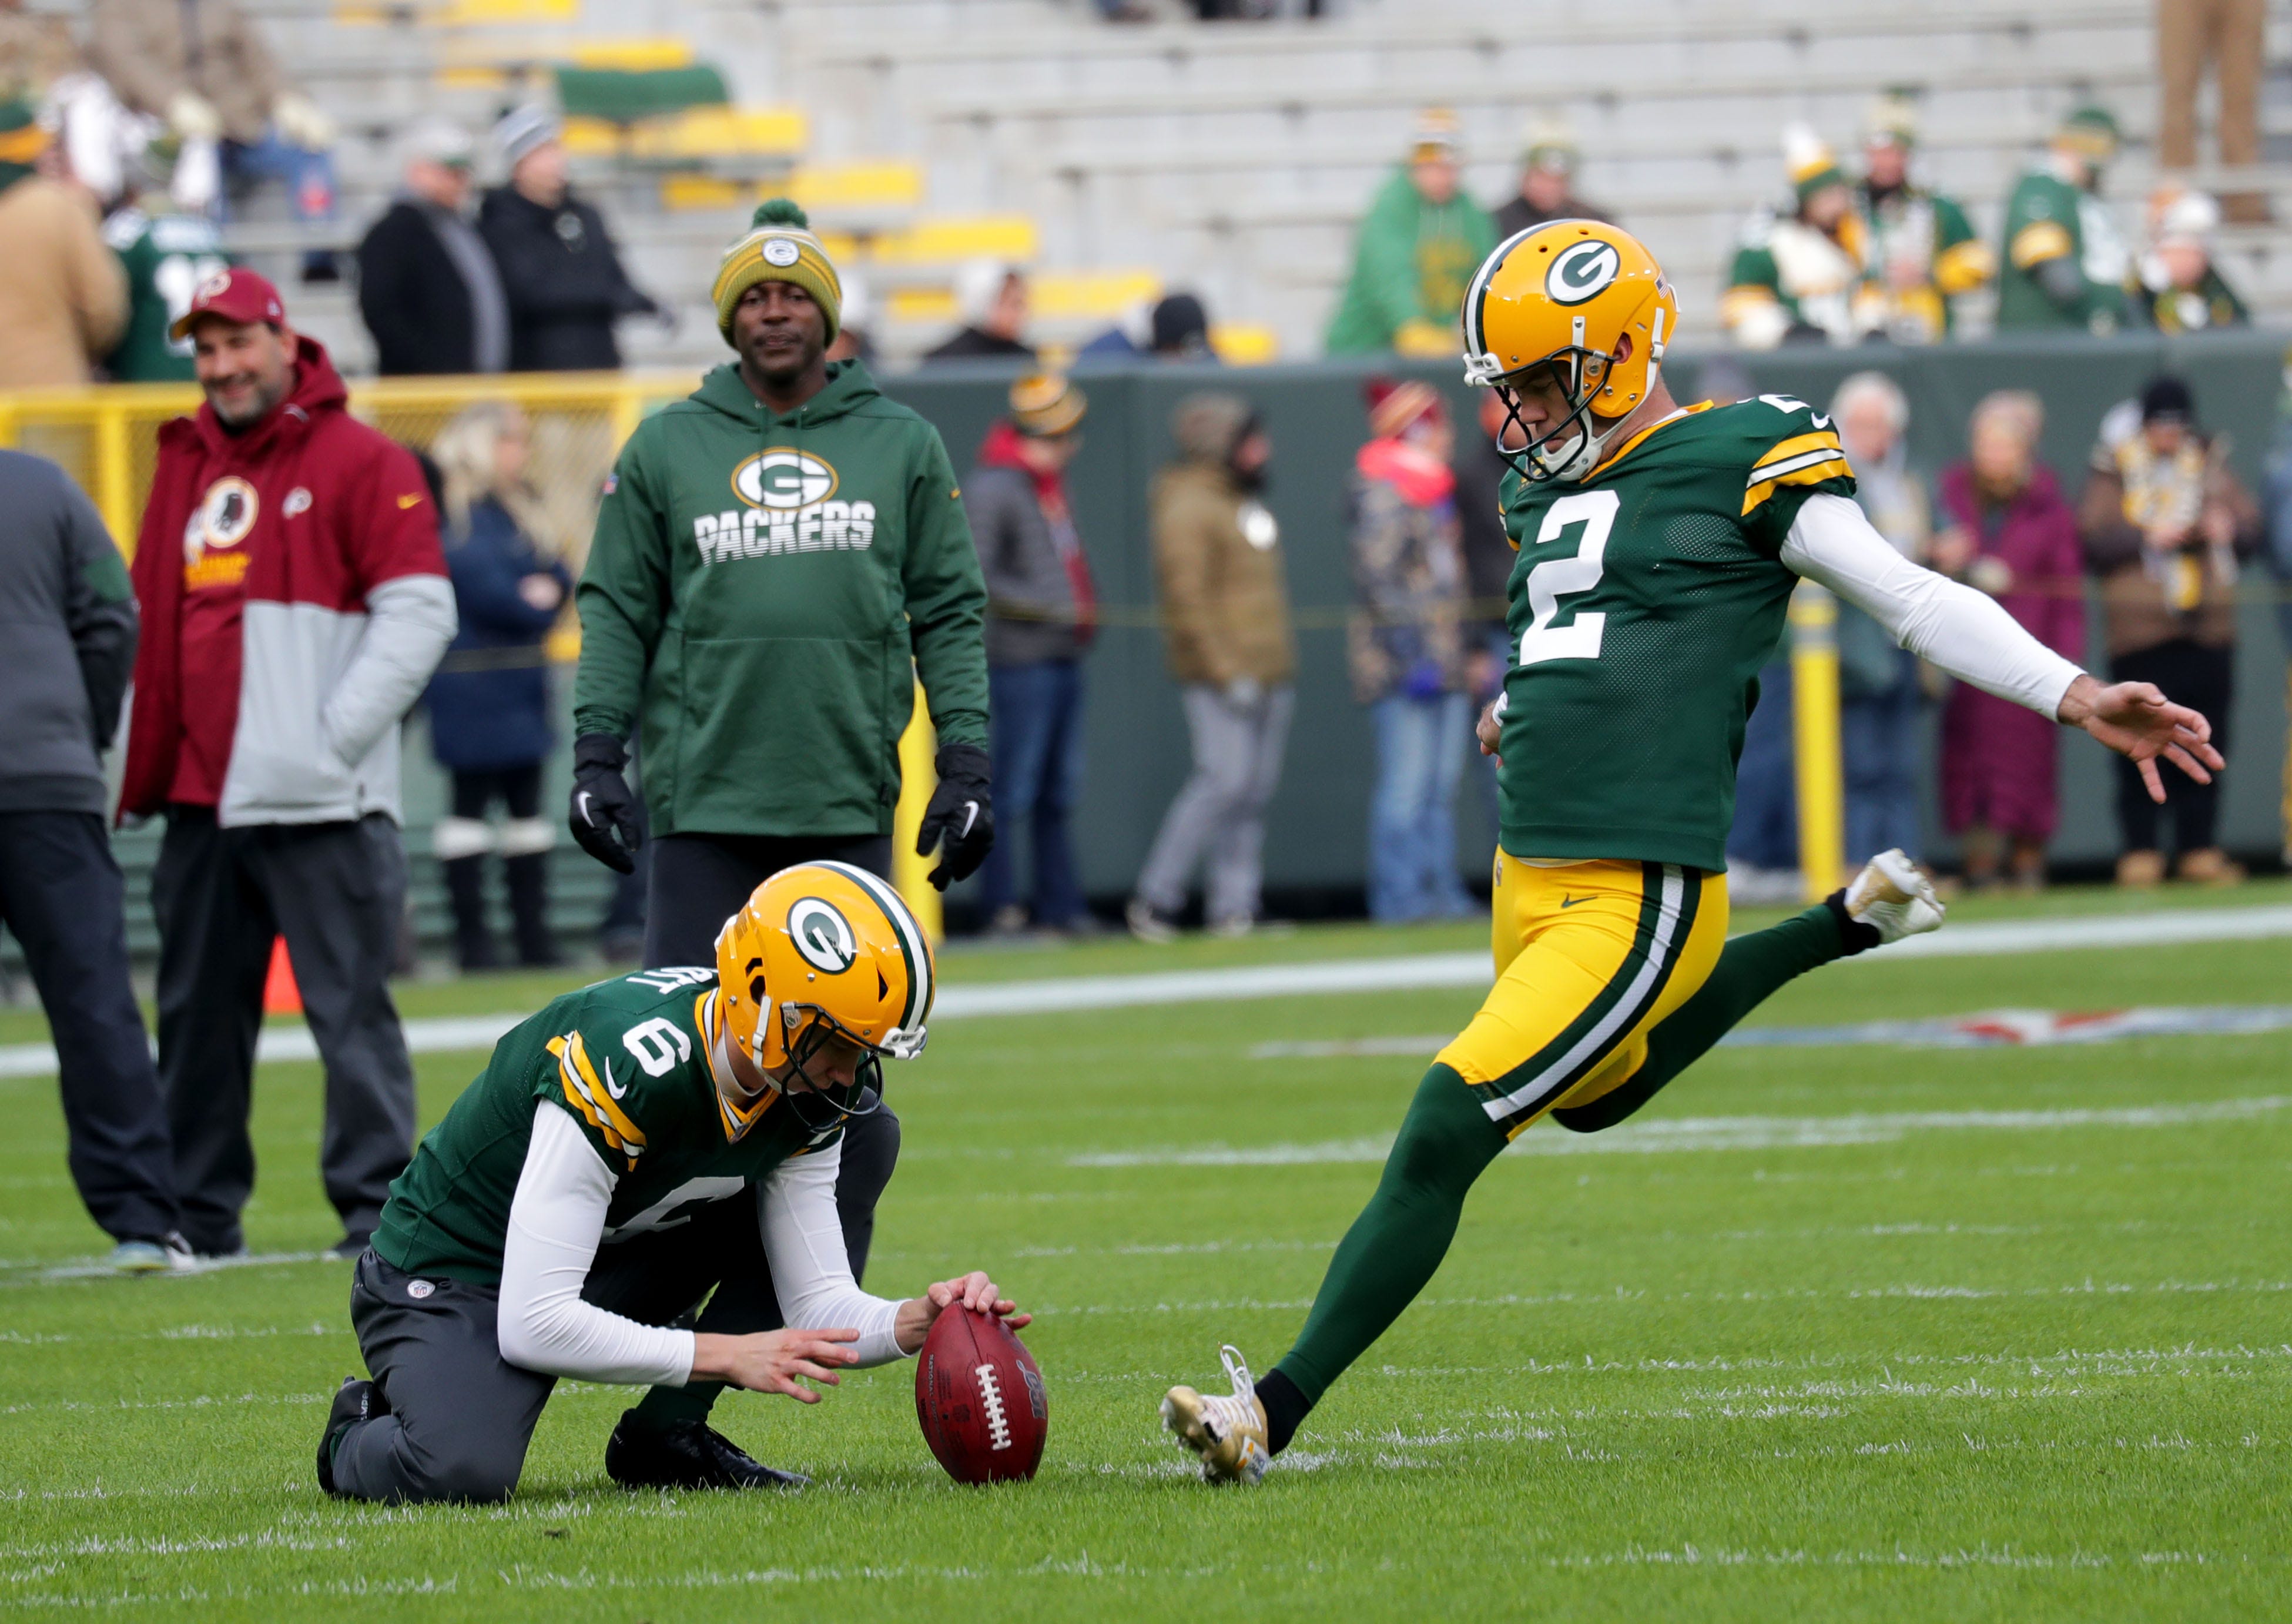 Green Bay Packers kicker Mason Crosby (2) kicks a field goal as Green Bay Packers punter J.K. Scott (6) holds before the Green Bay Packers football game against the Washington Redskins at Lambeau Field in Green Bay  on Sunday, Dec. 8, 2019.  Photo by Mike De Sisti/Milwaukee Journal Sentinel